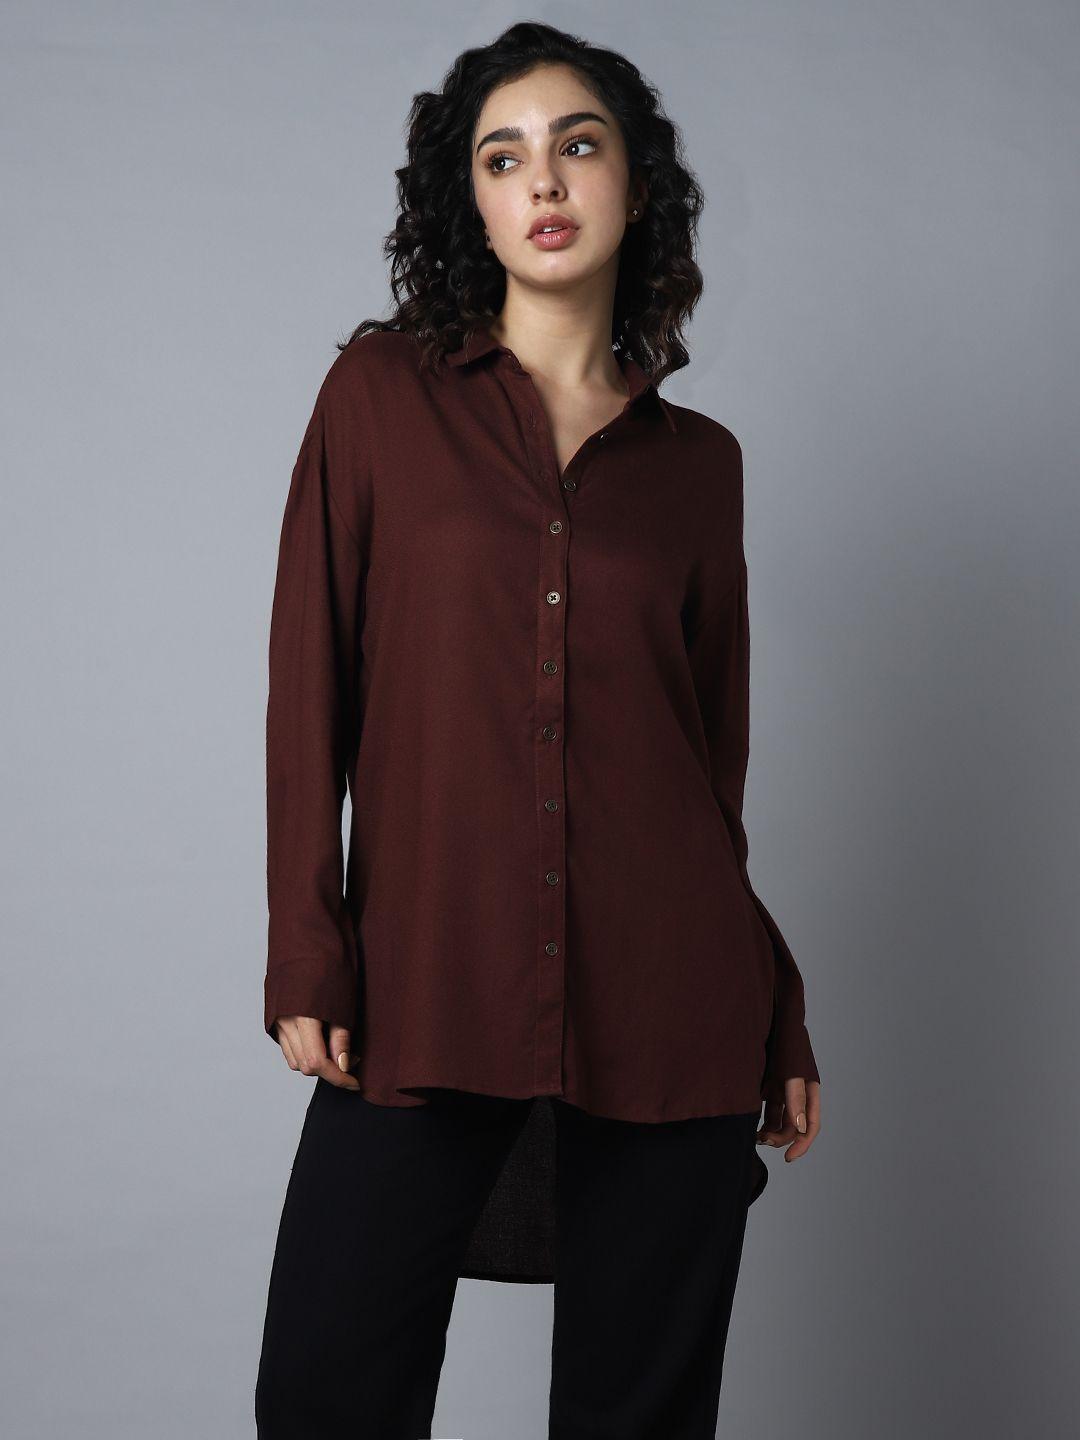 high star classic oversized spread collar long sleeves casual shirt